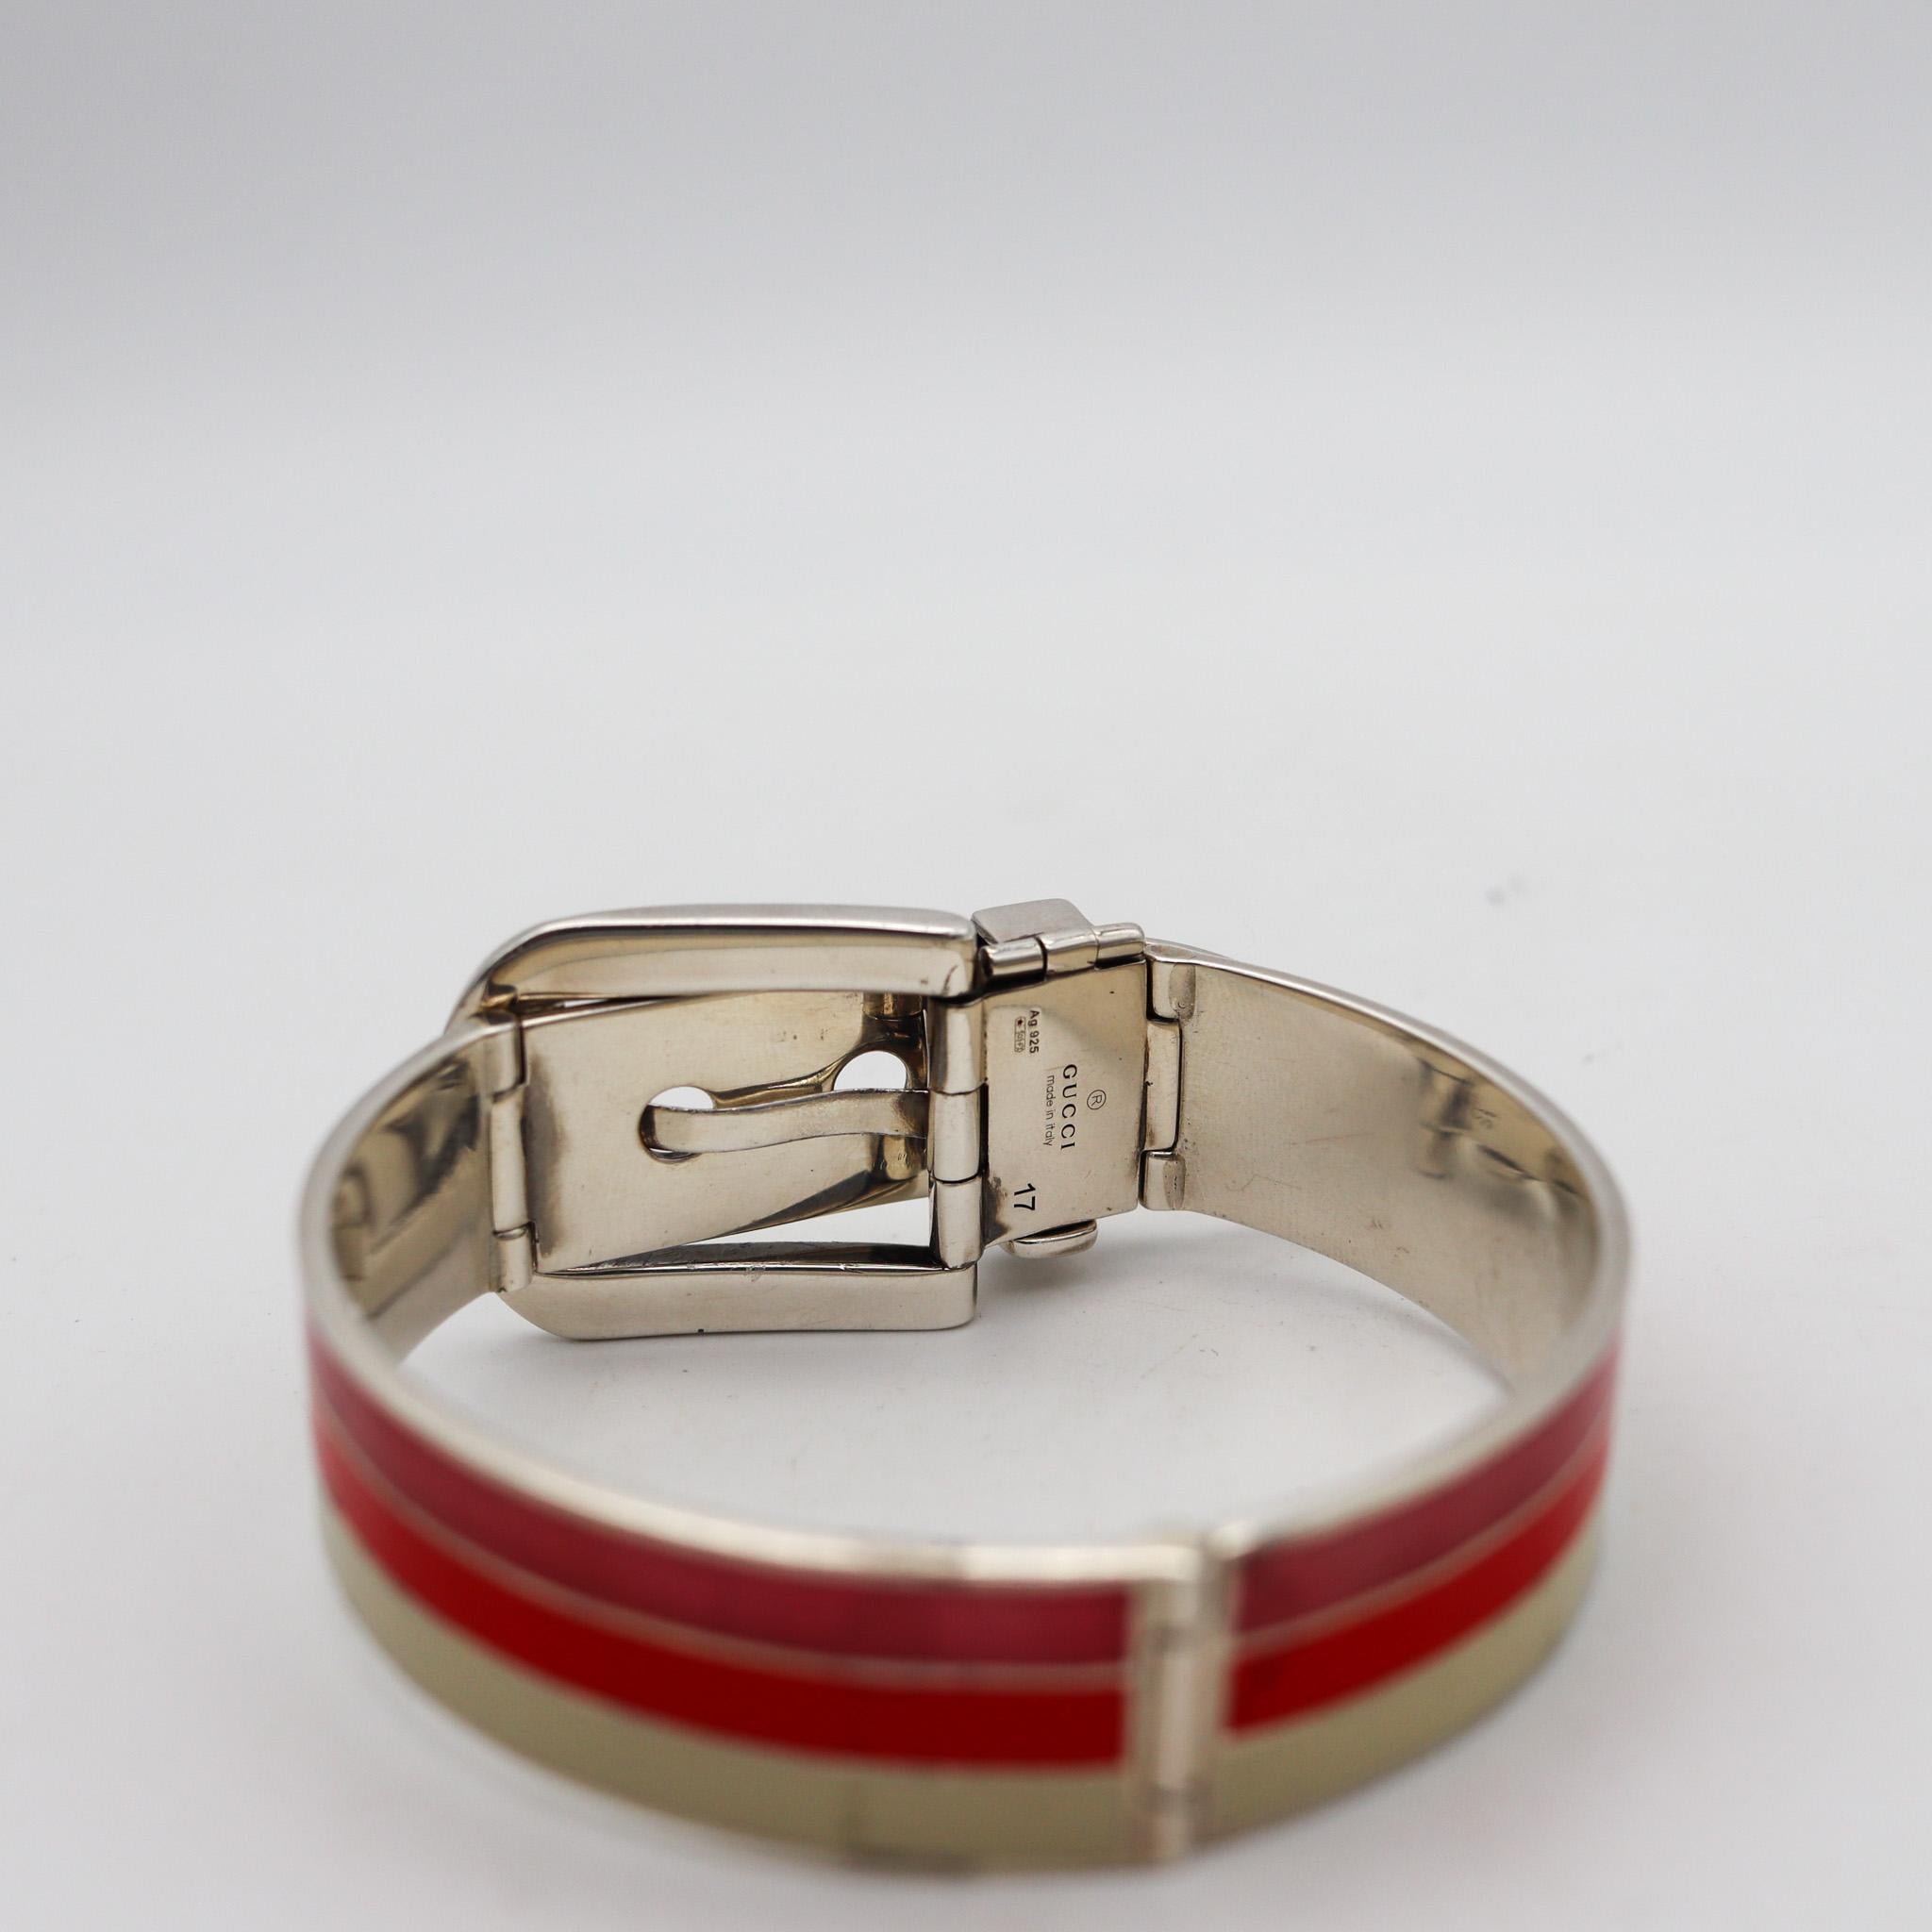 Gucci 1980 Buckle Bracelet In .925 Sterling Silver With Pink And White Enamel For Sale 1